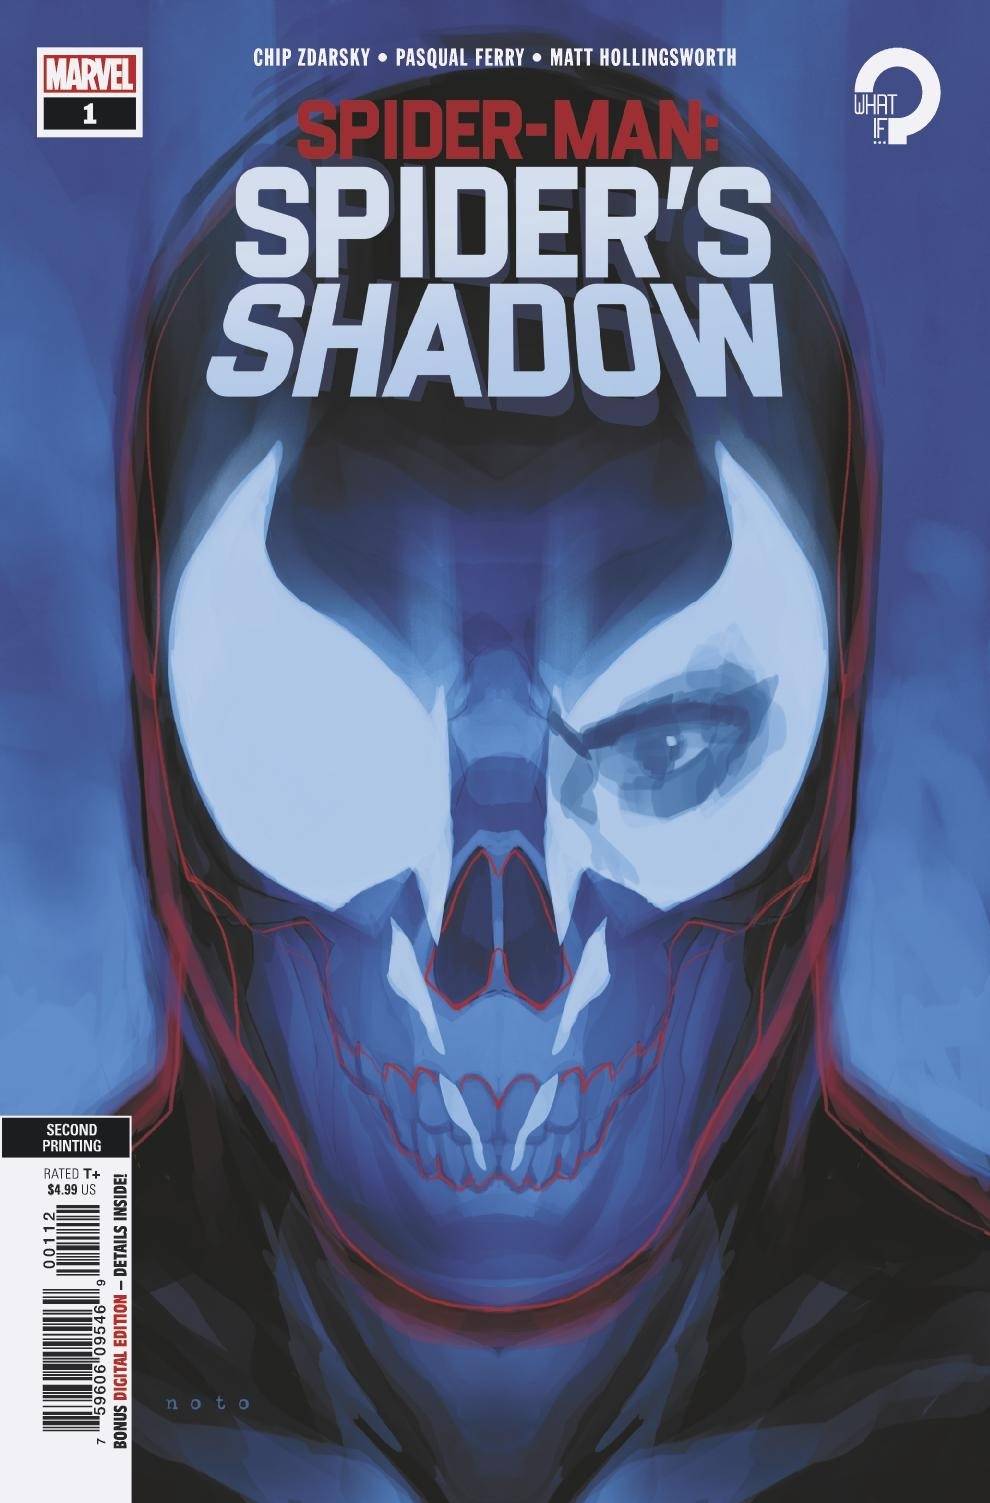 SPIDER-MAN SPIDERS SHADOW #1 (OF 5) 2ND PTG VAR